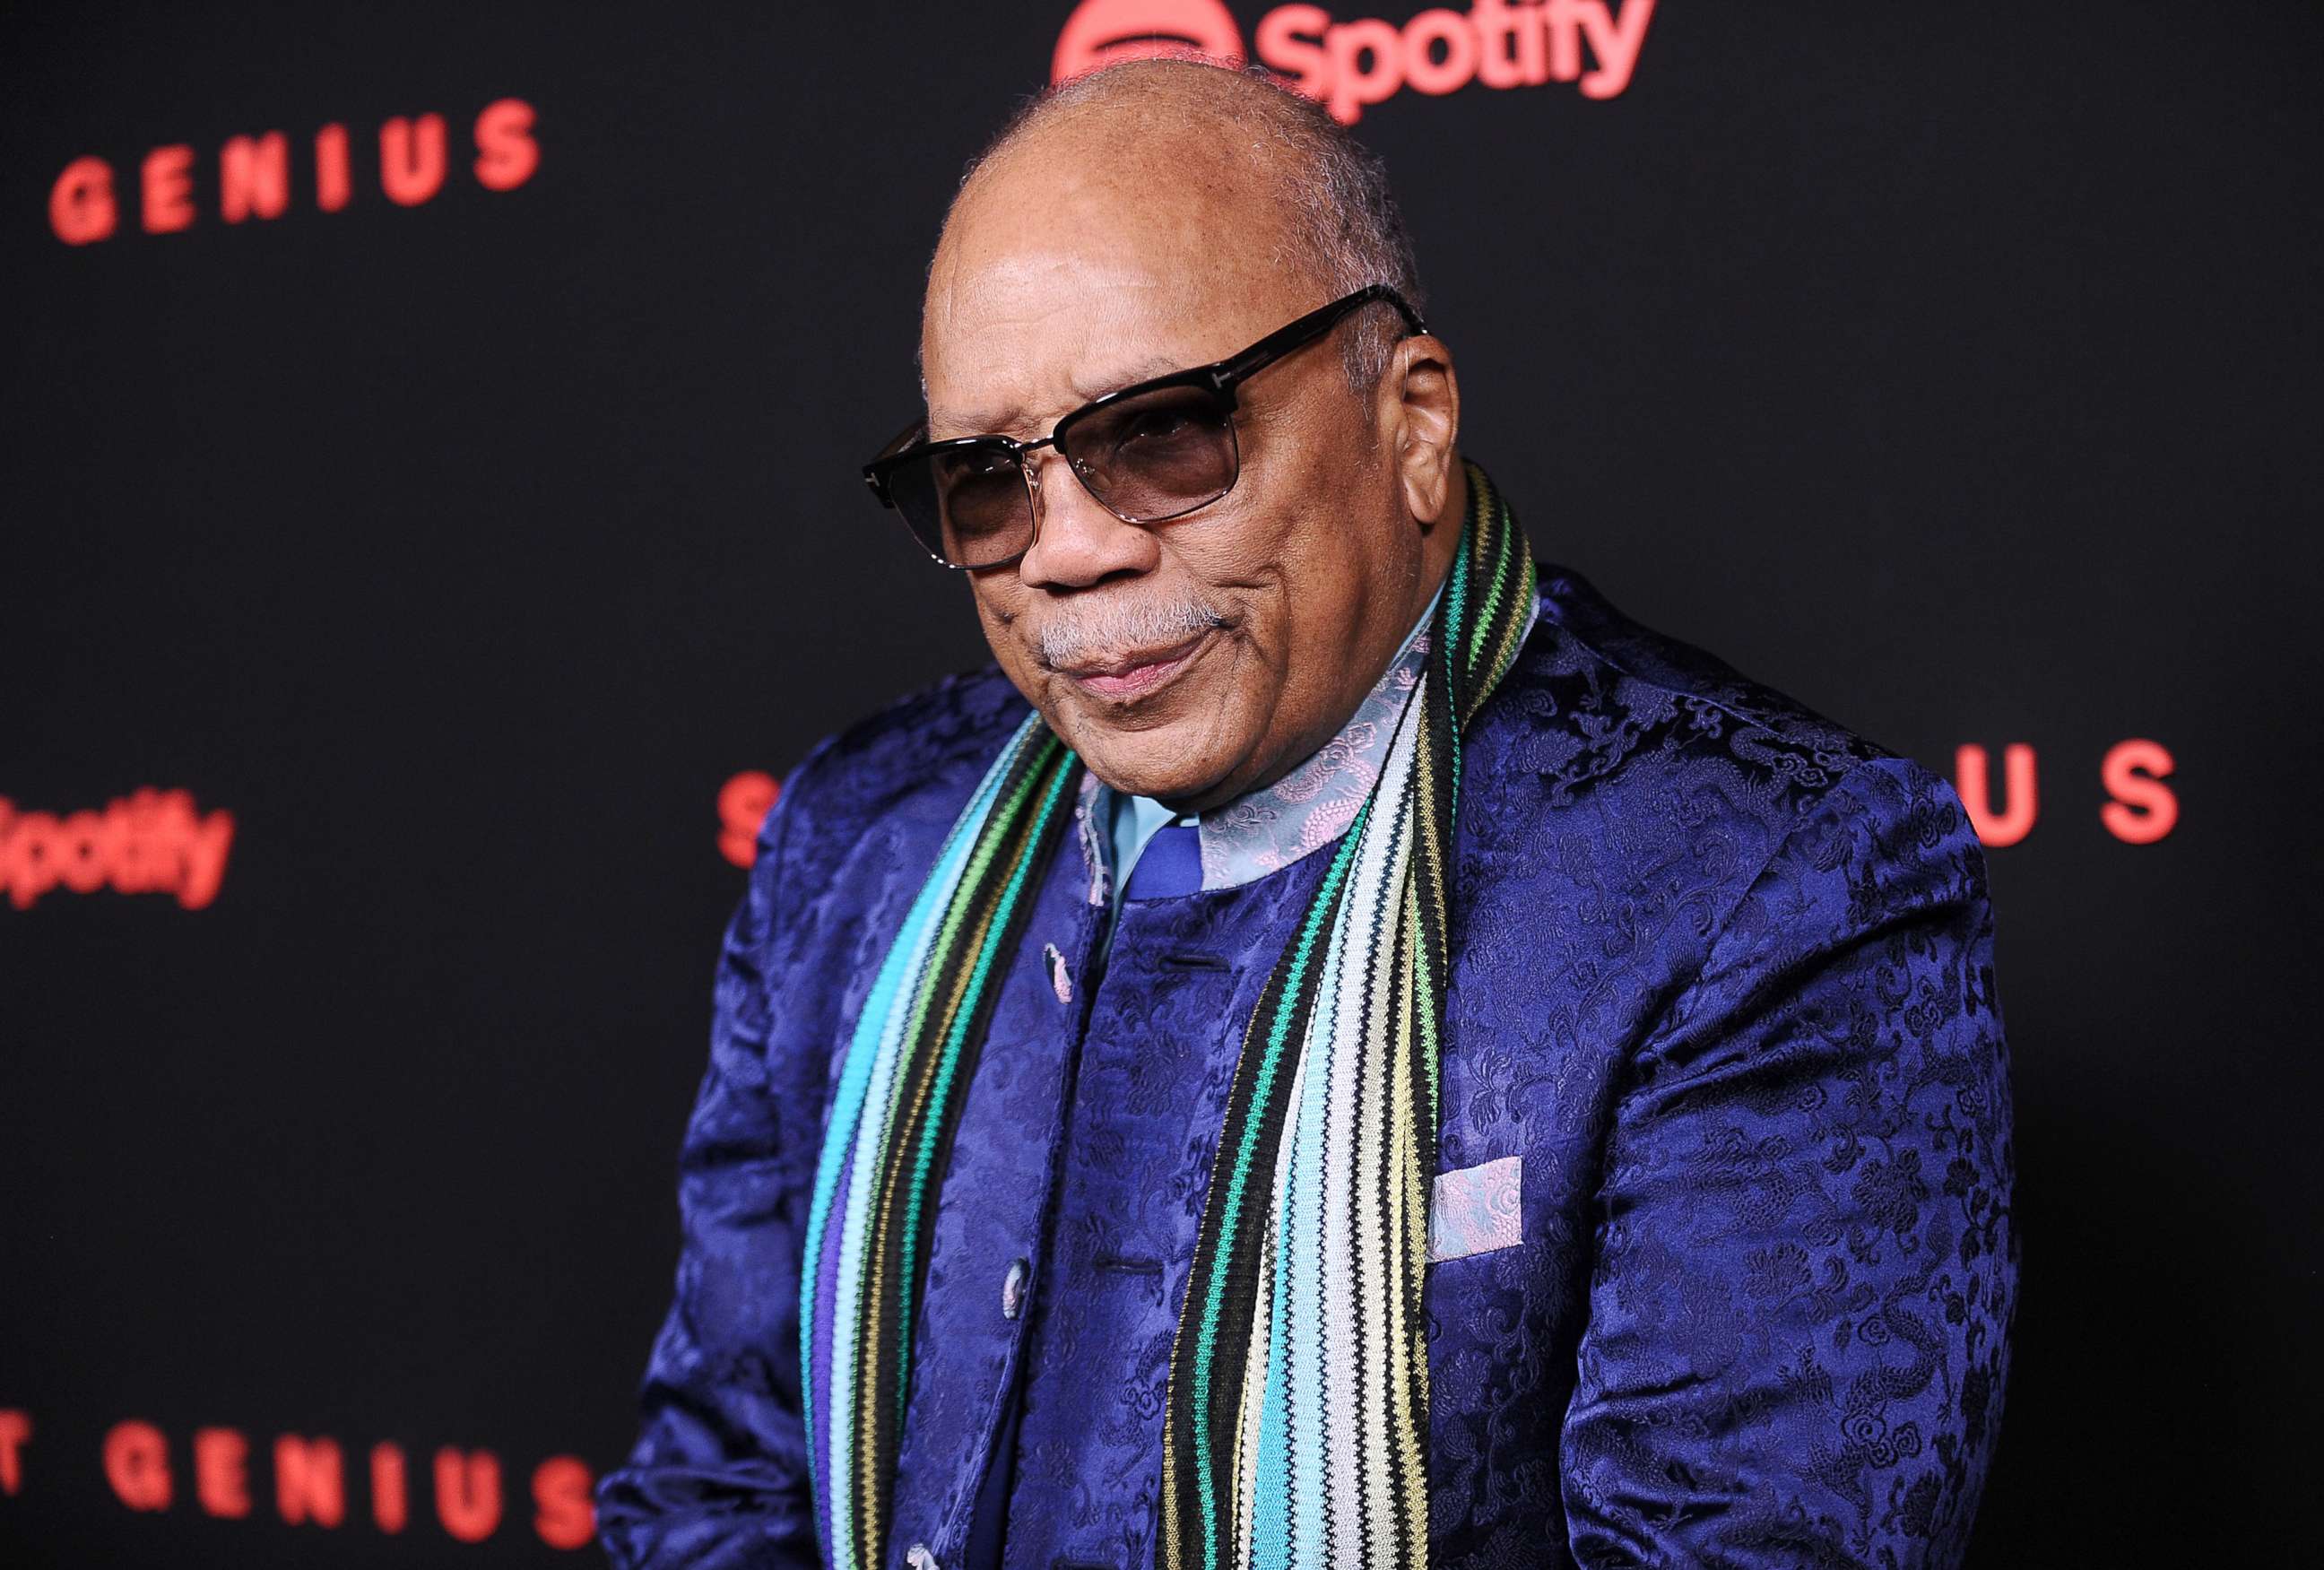 PHOTO: Quincy Jones attends Spotify's inaugural Secret Genius Awards at Vibiana Cathedral on Nov. 1, 2017 in Los Angeles. 